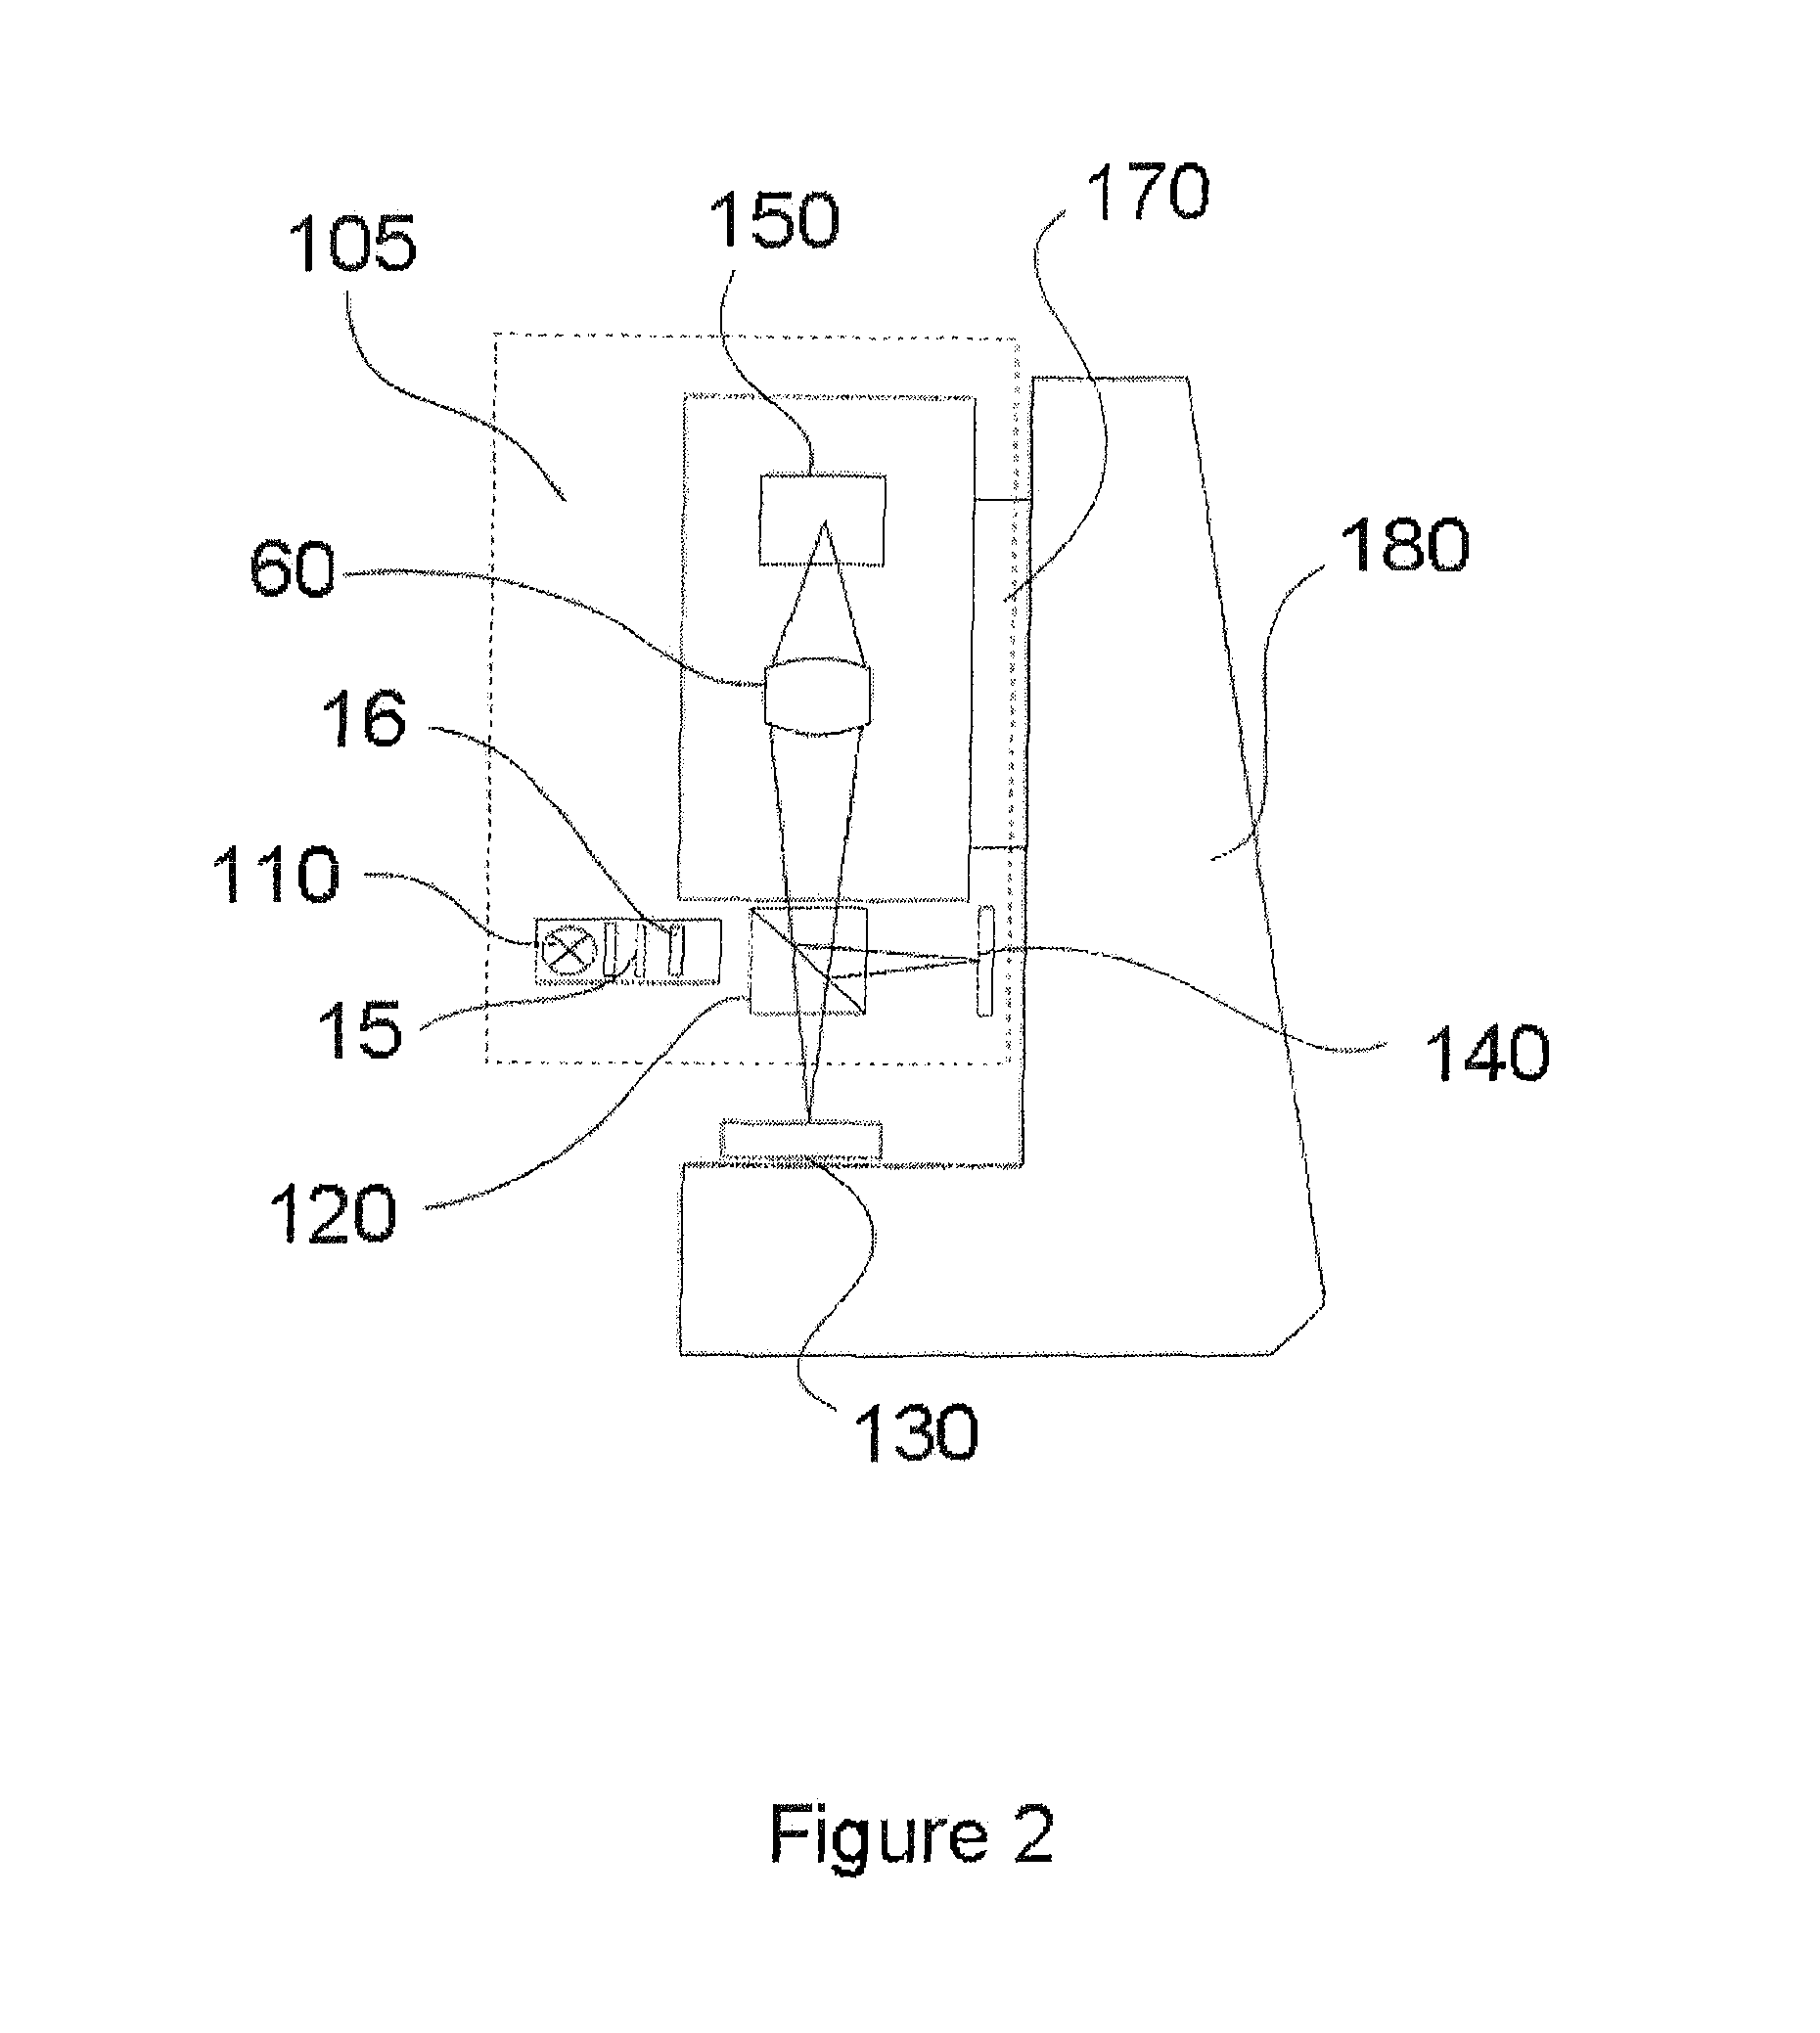 White light scanning interferometer with simultaneous phase-shifting module